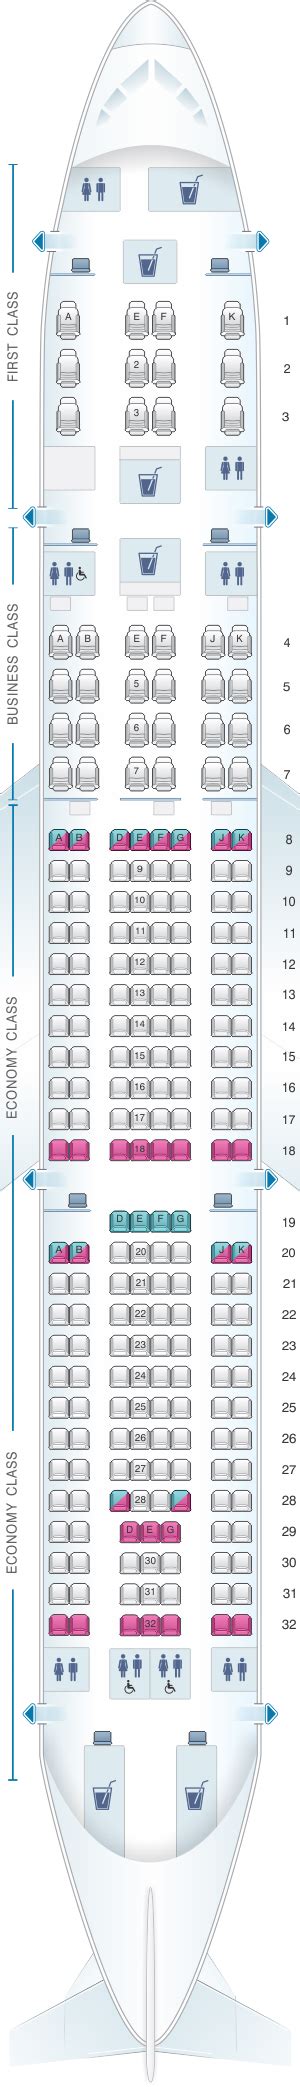 Airbus A300 200 Seat Map